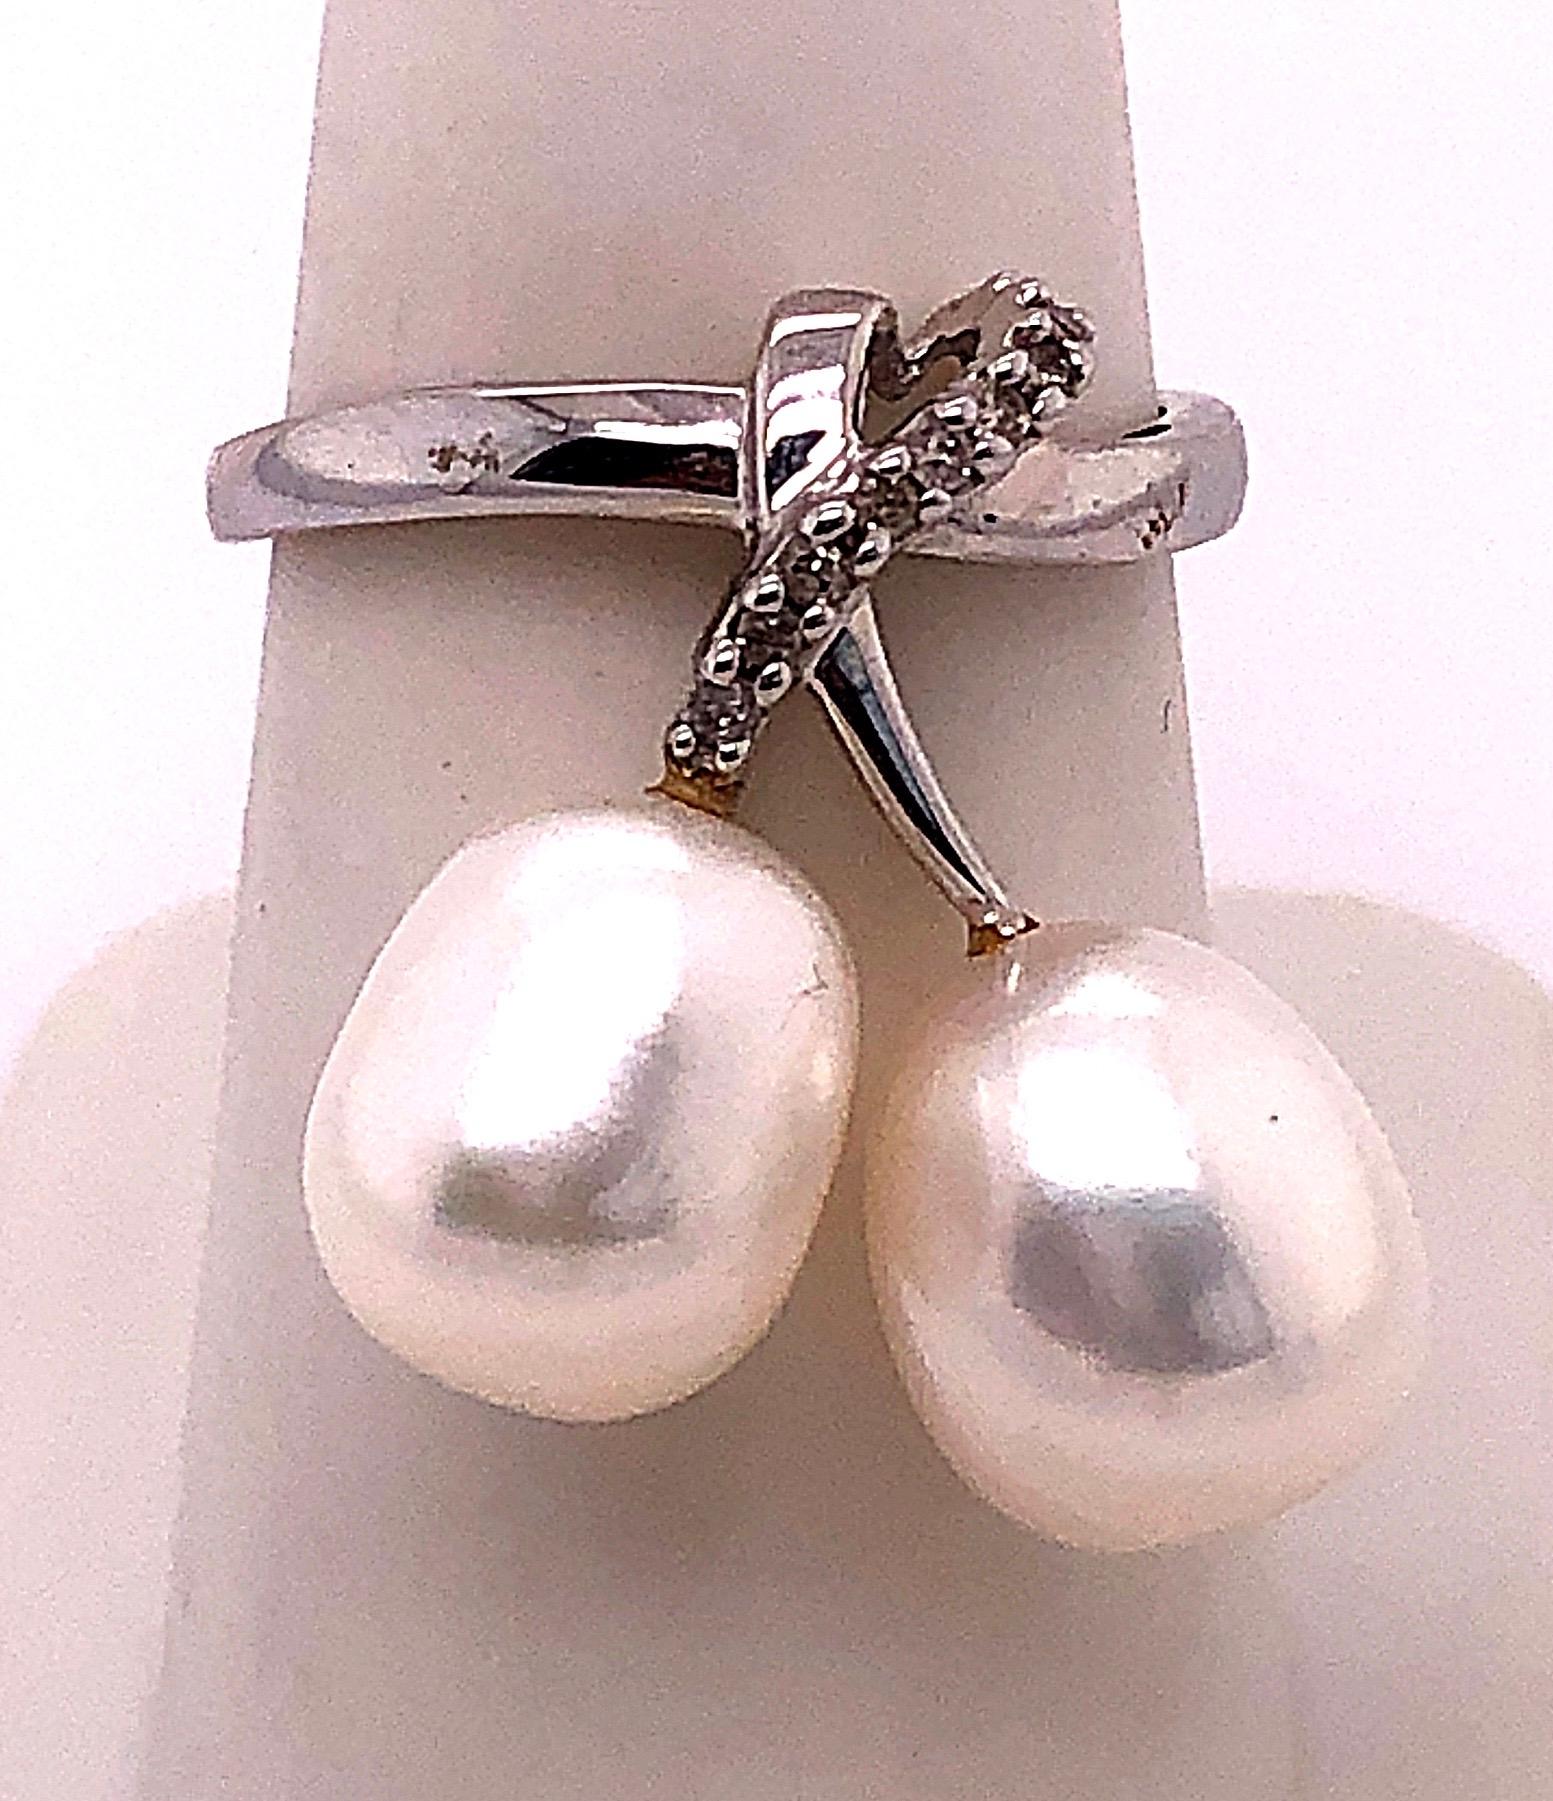 14 Karat White Gold Pearl and Diamond Free Form Ring
0.06 total diamond weight.
2 piece 9.5 mm pearls
Size 7
2.04 grams total weight.
Height: 25 mm
Width: 22 mm